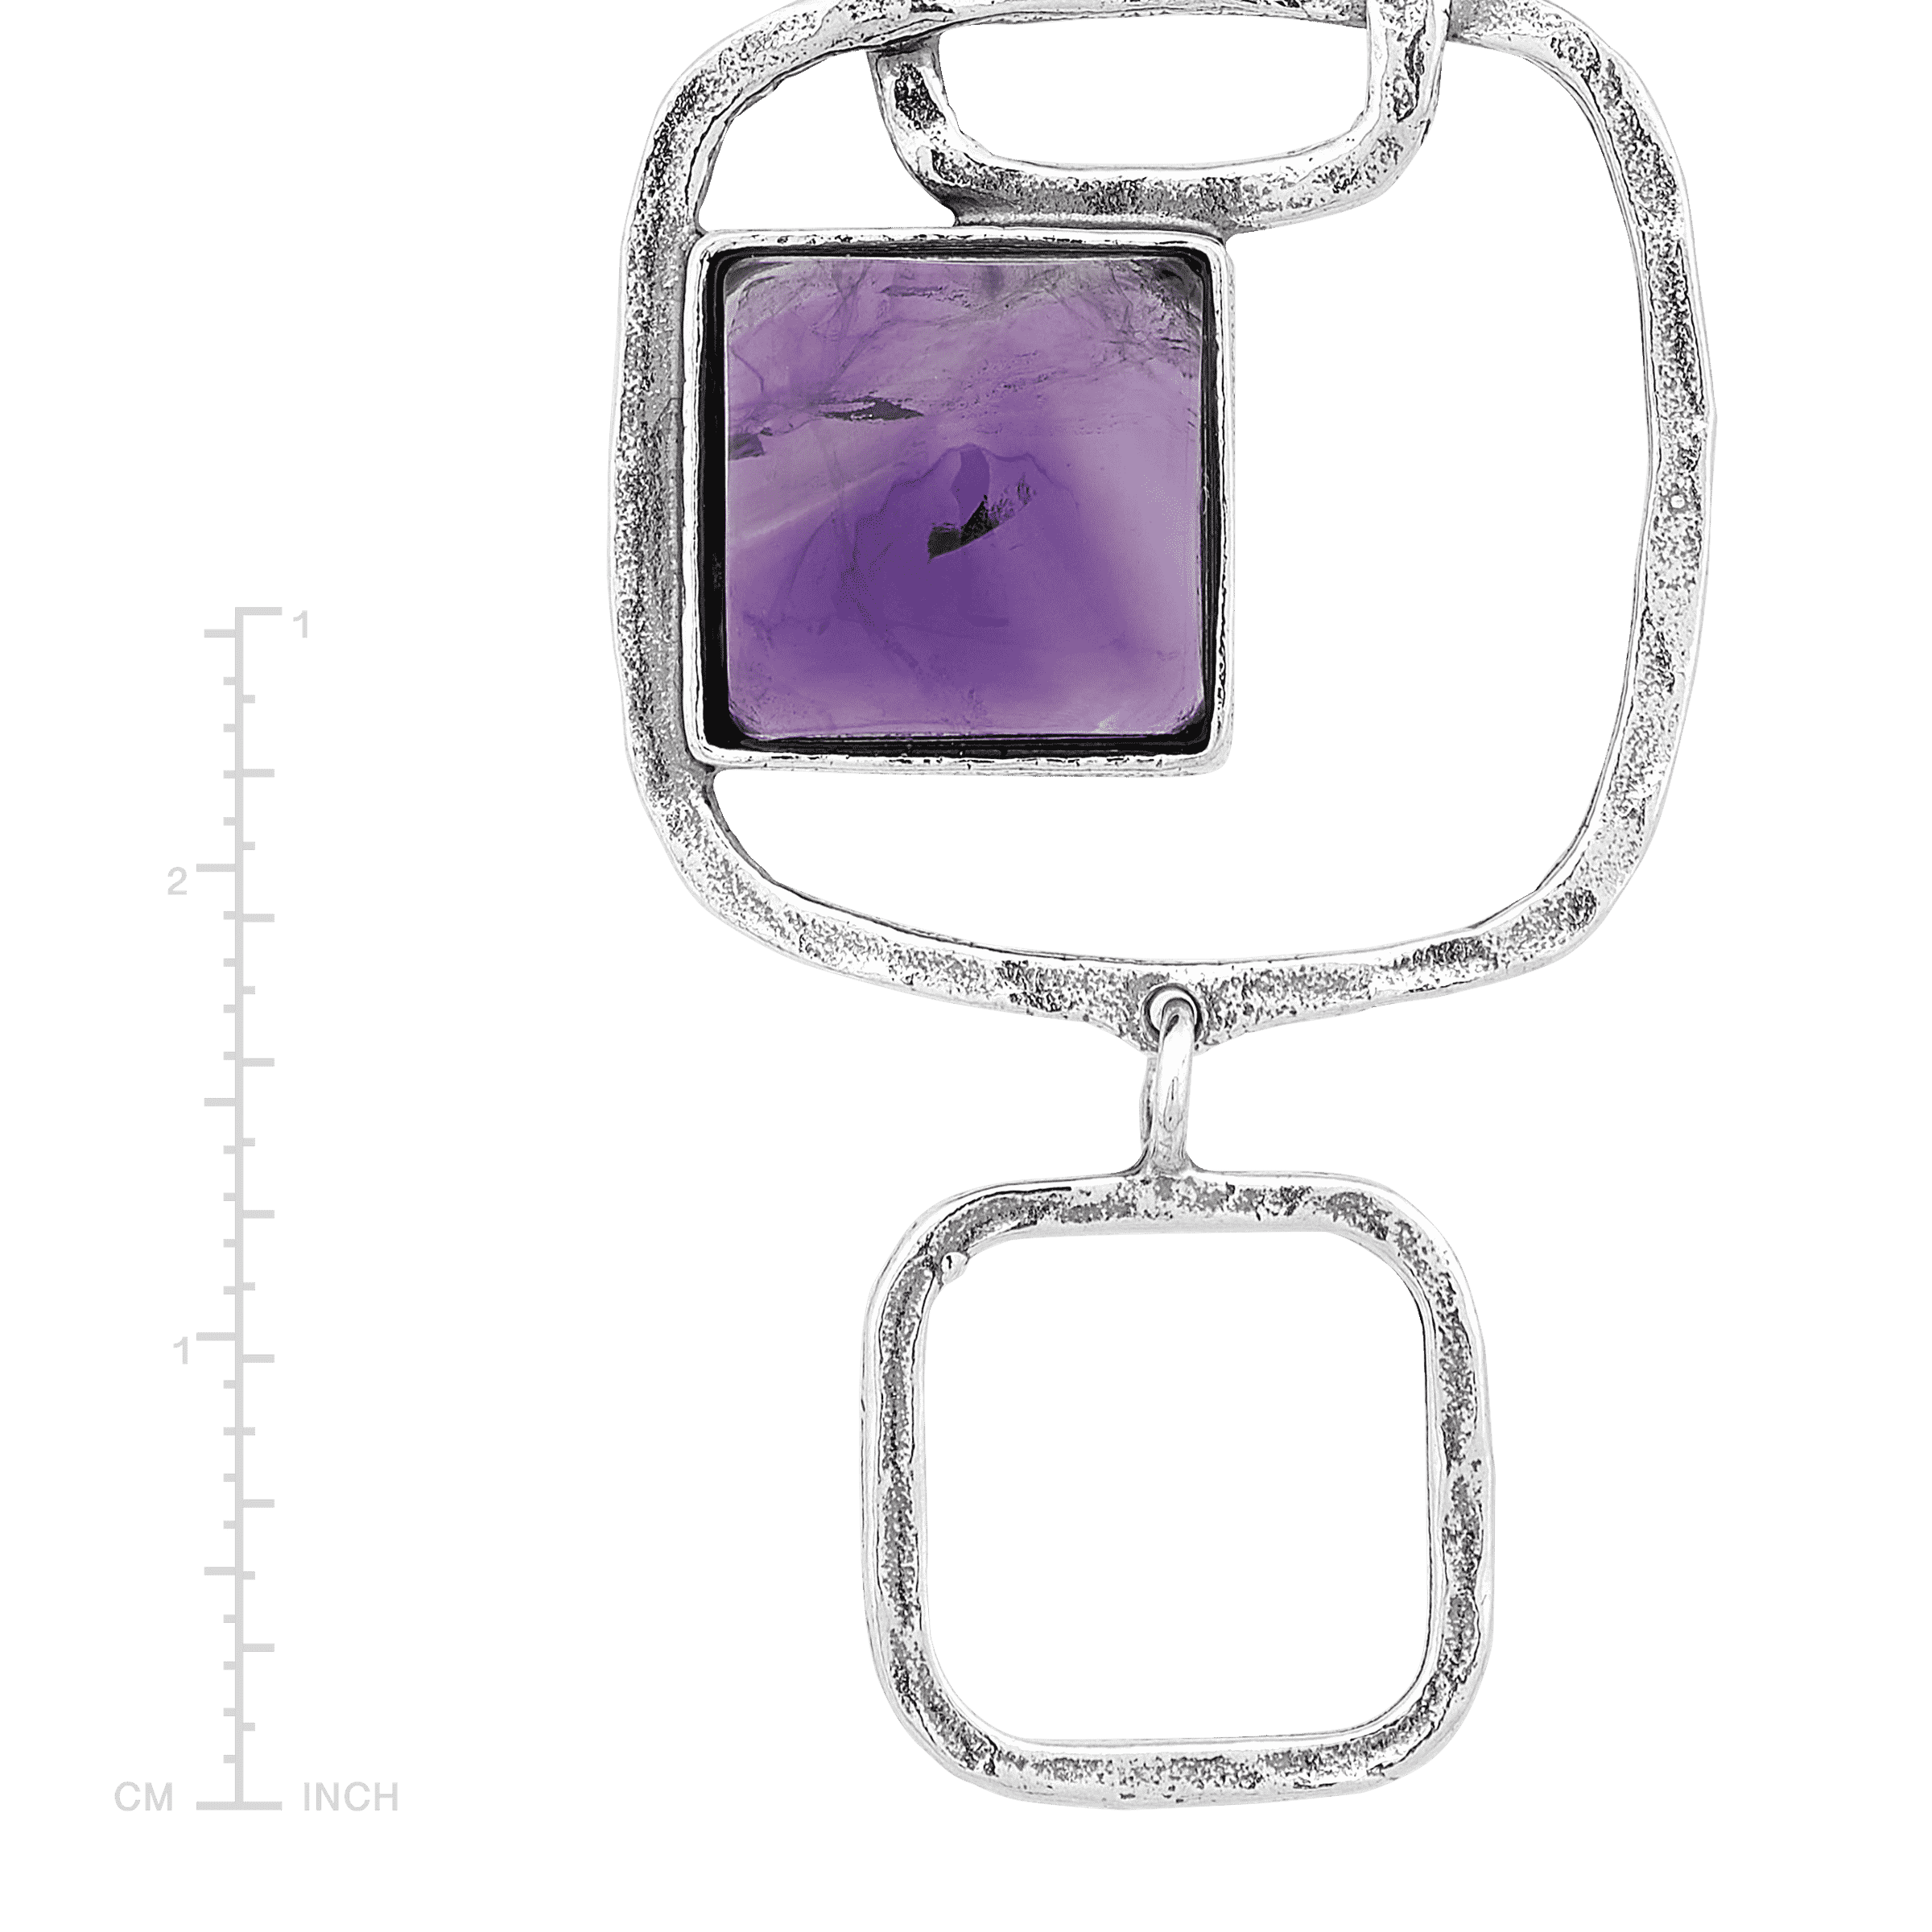 Silpada 'Iconic' Amethyst Pendant Necklace in Sterling Silver, 18 + 2